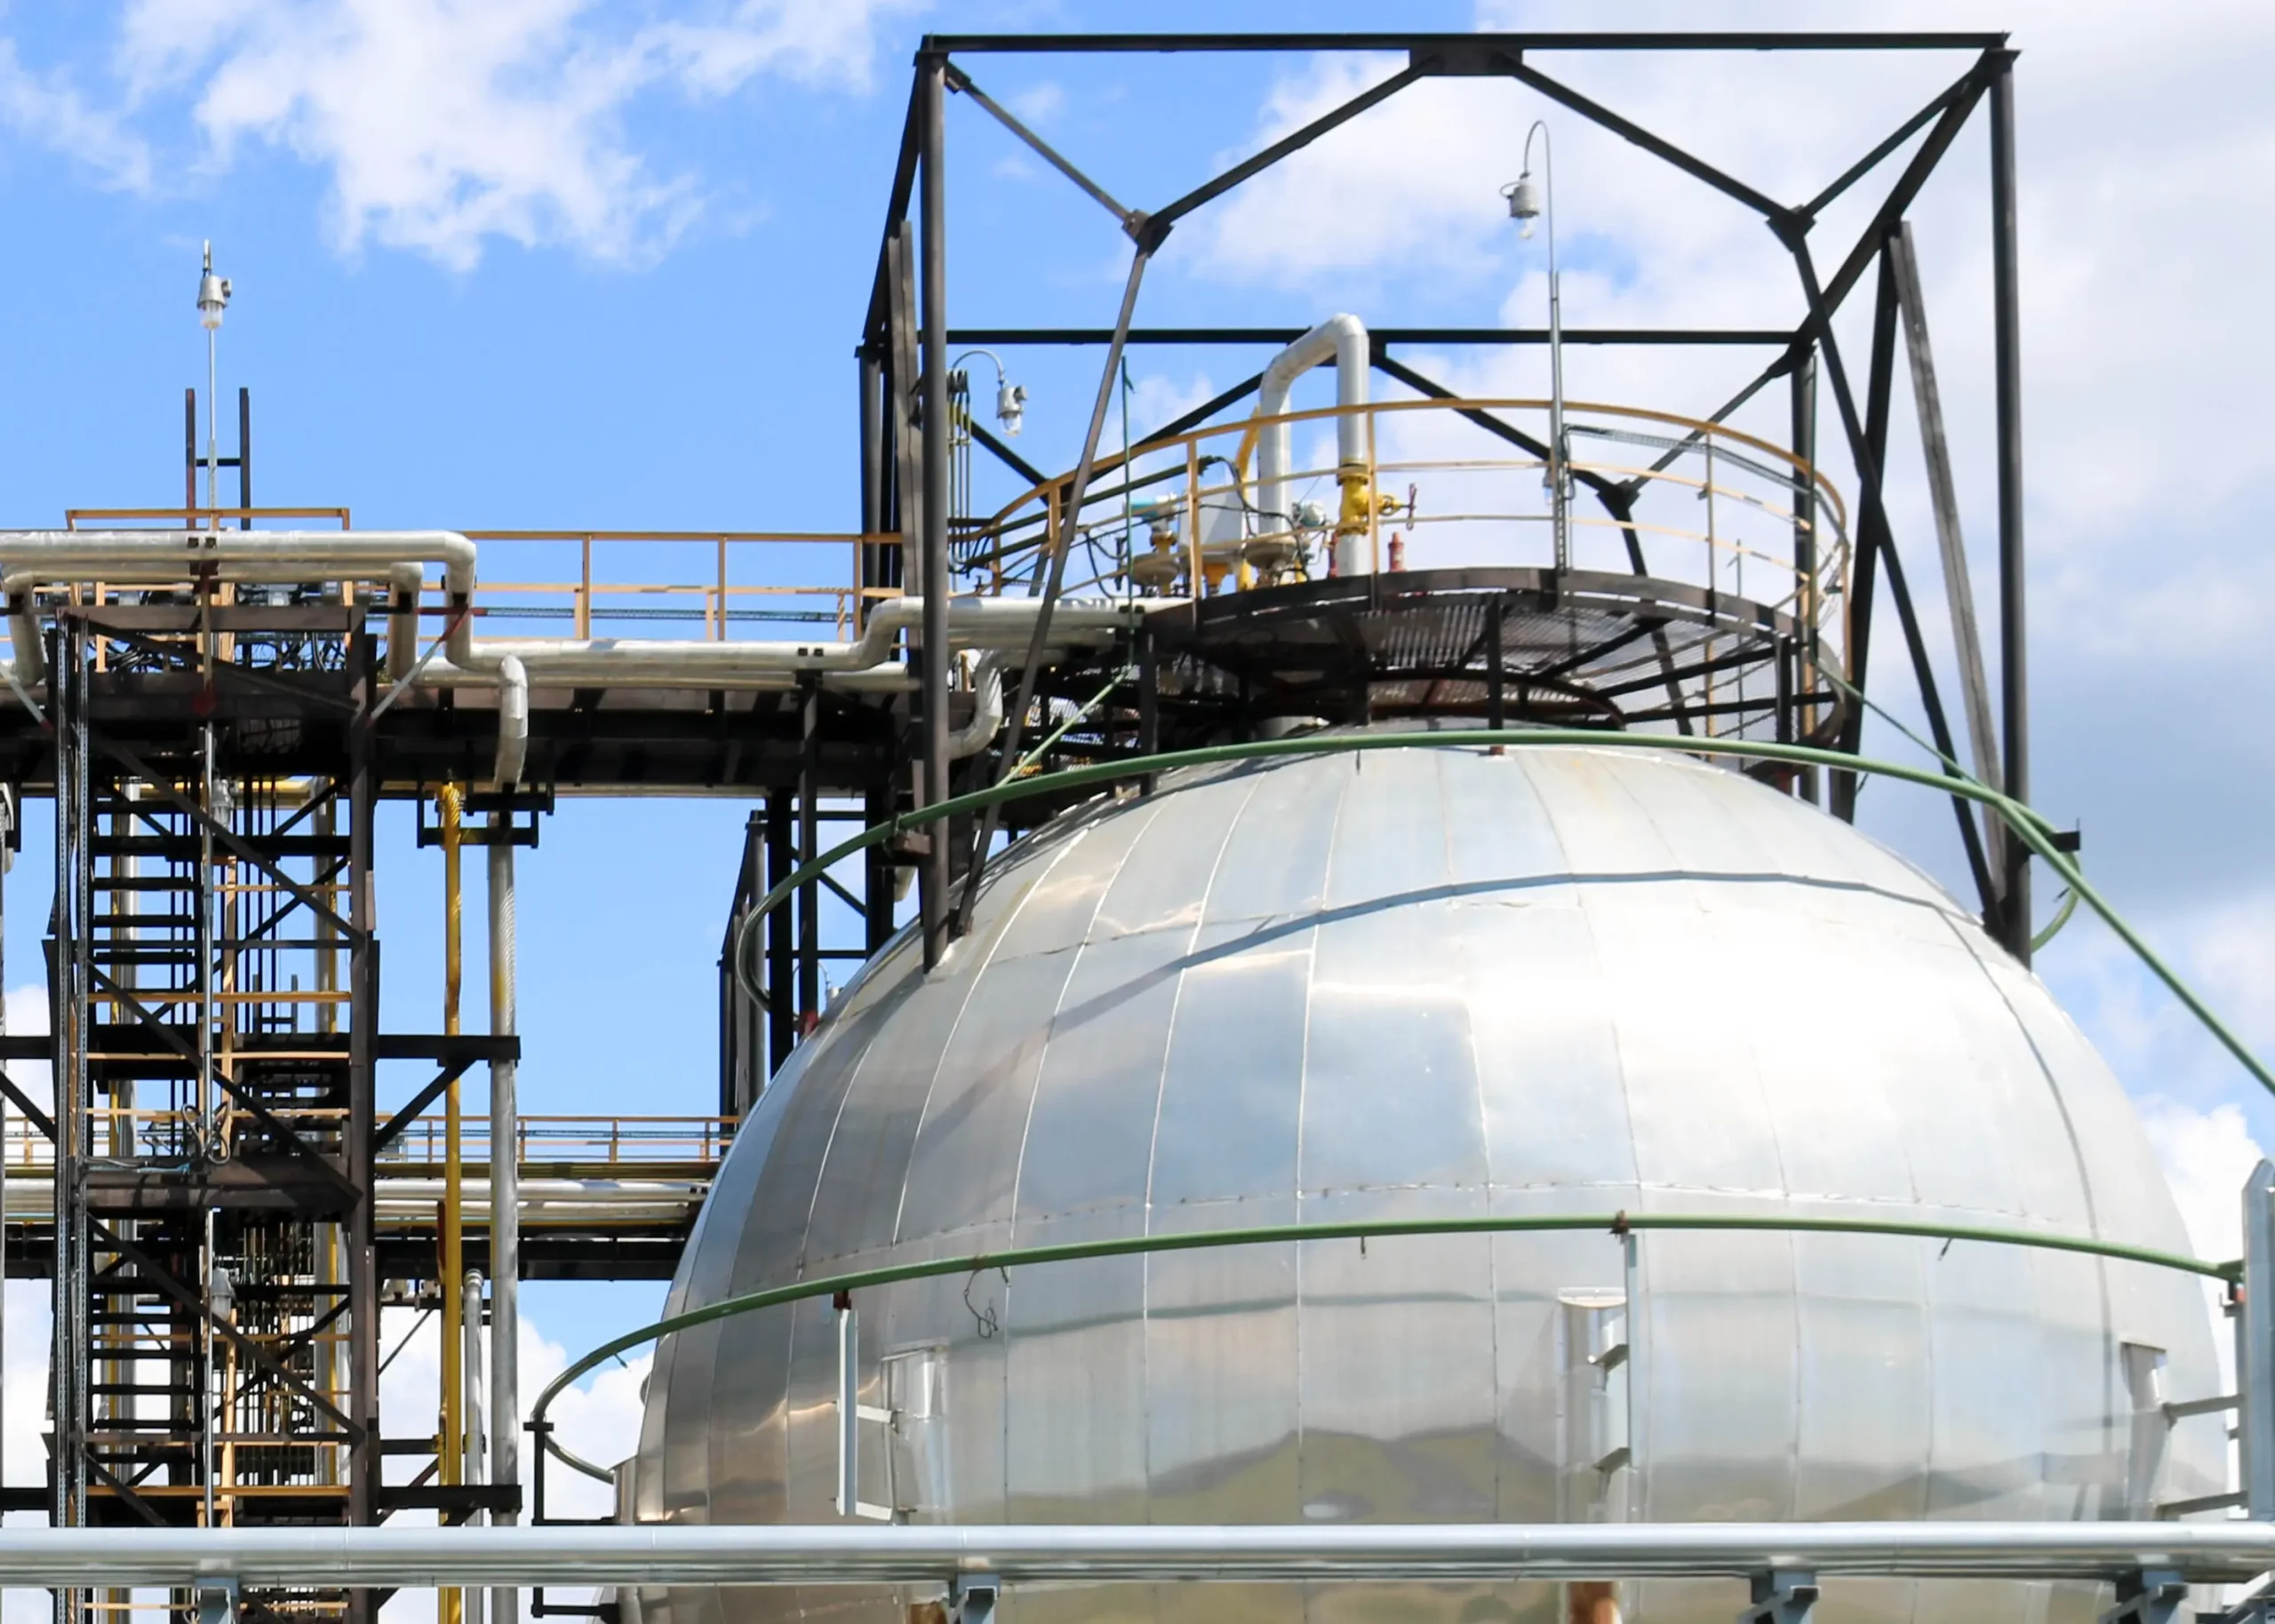 A robust, shiny metal ammonia storage tank with pipes and equipment is used in the petrochemical refinery for high-pressure iron storage.